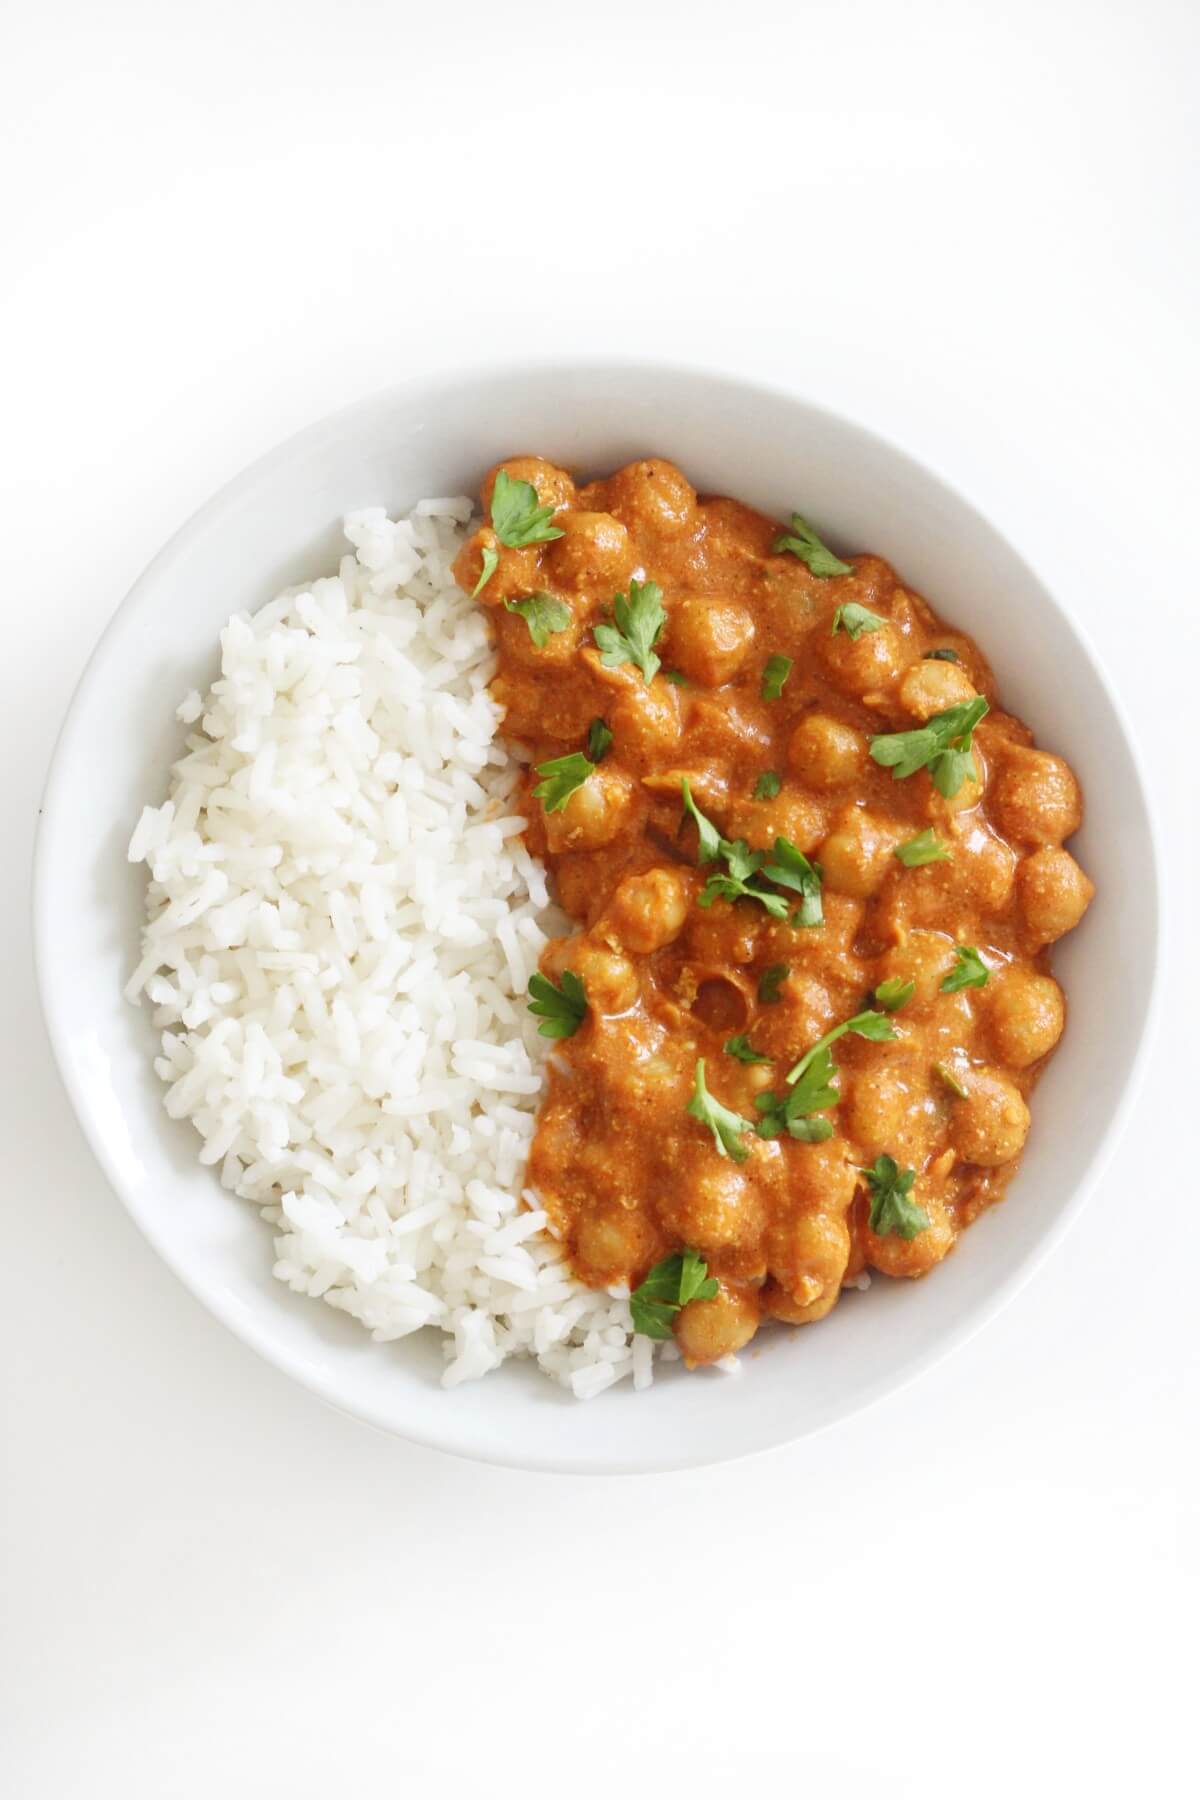 A bowl with the left half white rice and the right half chickpea curry.